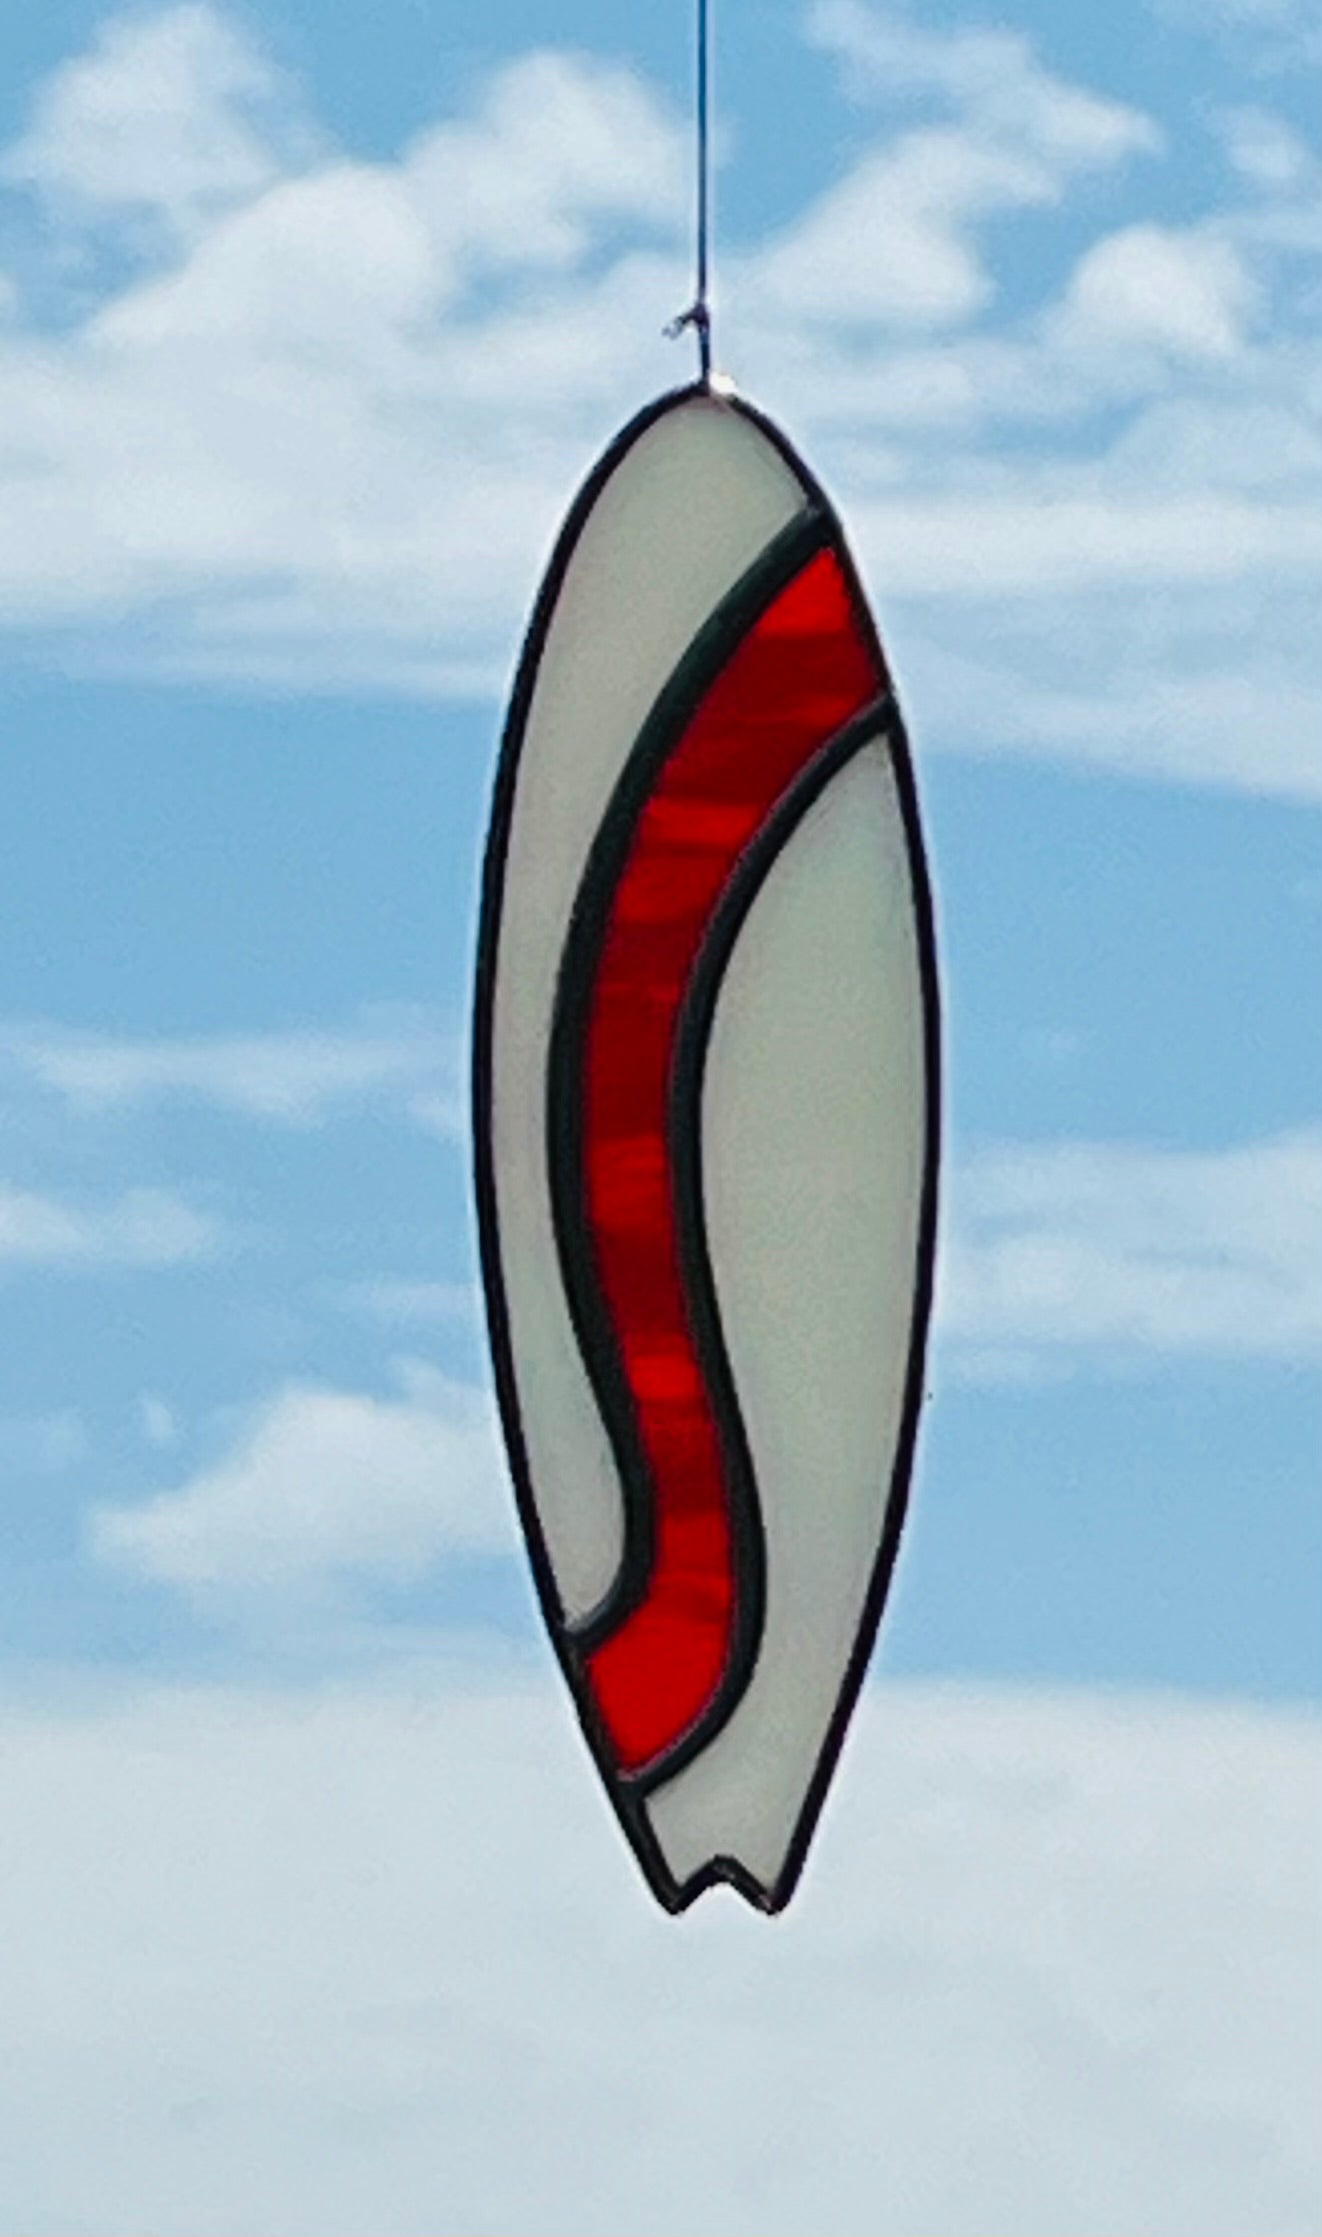 A stained glass shortboard that is made with white opalescent glass with a red glass wave down the center. Hung with a blue sky background.